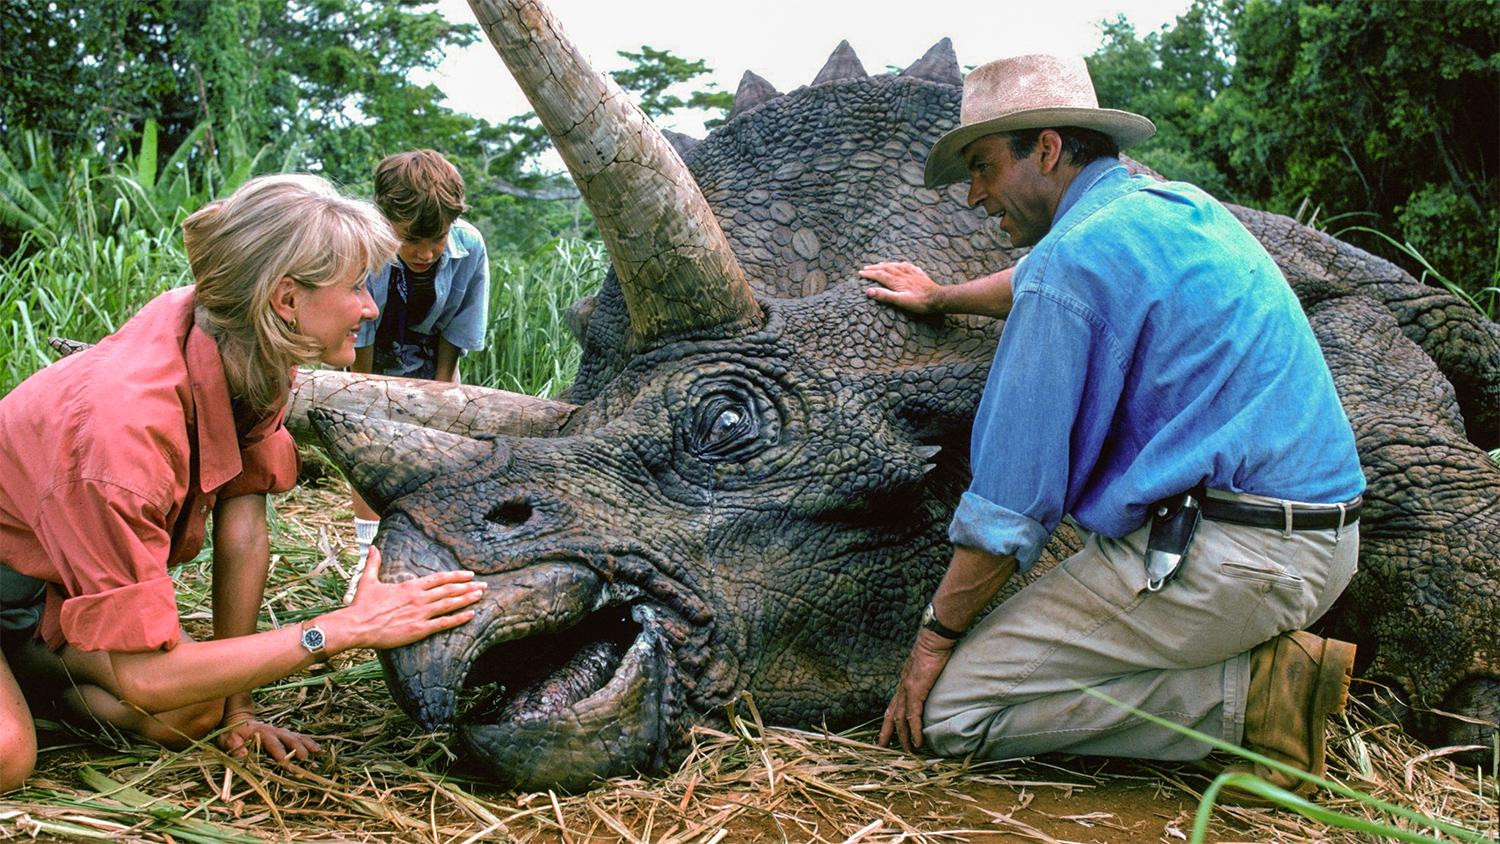 You can watch every Jurassic Park film on Netflix from July 1st, The Manc